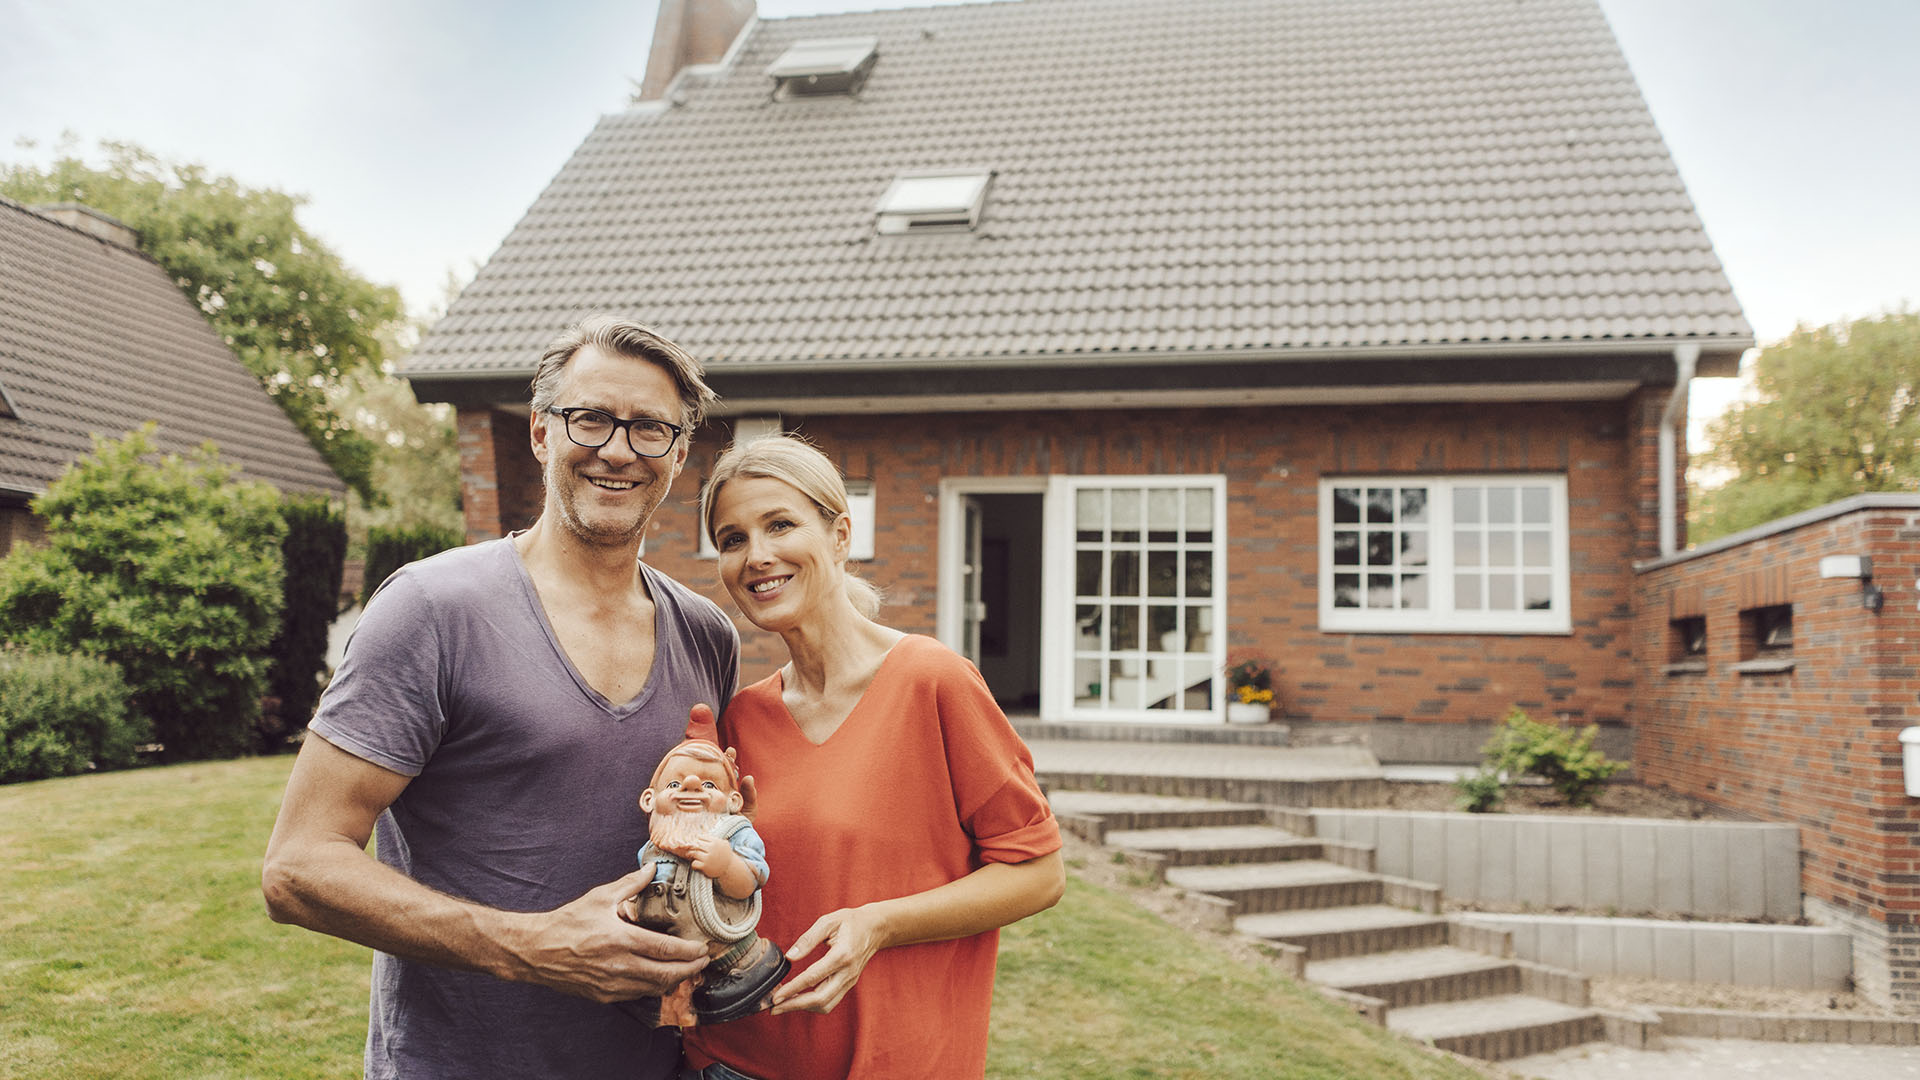 A smiling couple stands in front of a brick house, holding a garden gnome. The man wears glasses and a purple shirt, while the woman is in a red top. They seem thrilled to be homeowners, no longer wondering if renting is ruining their future. The house has a well-kept lawn and shrubs.